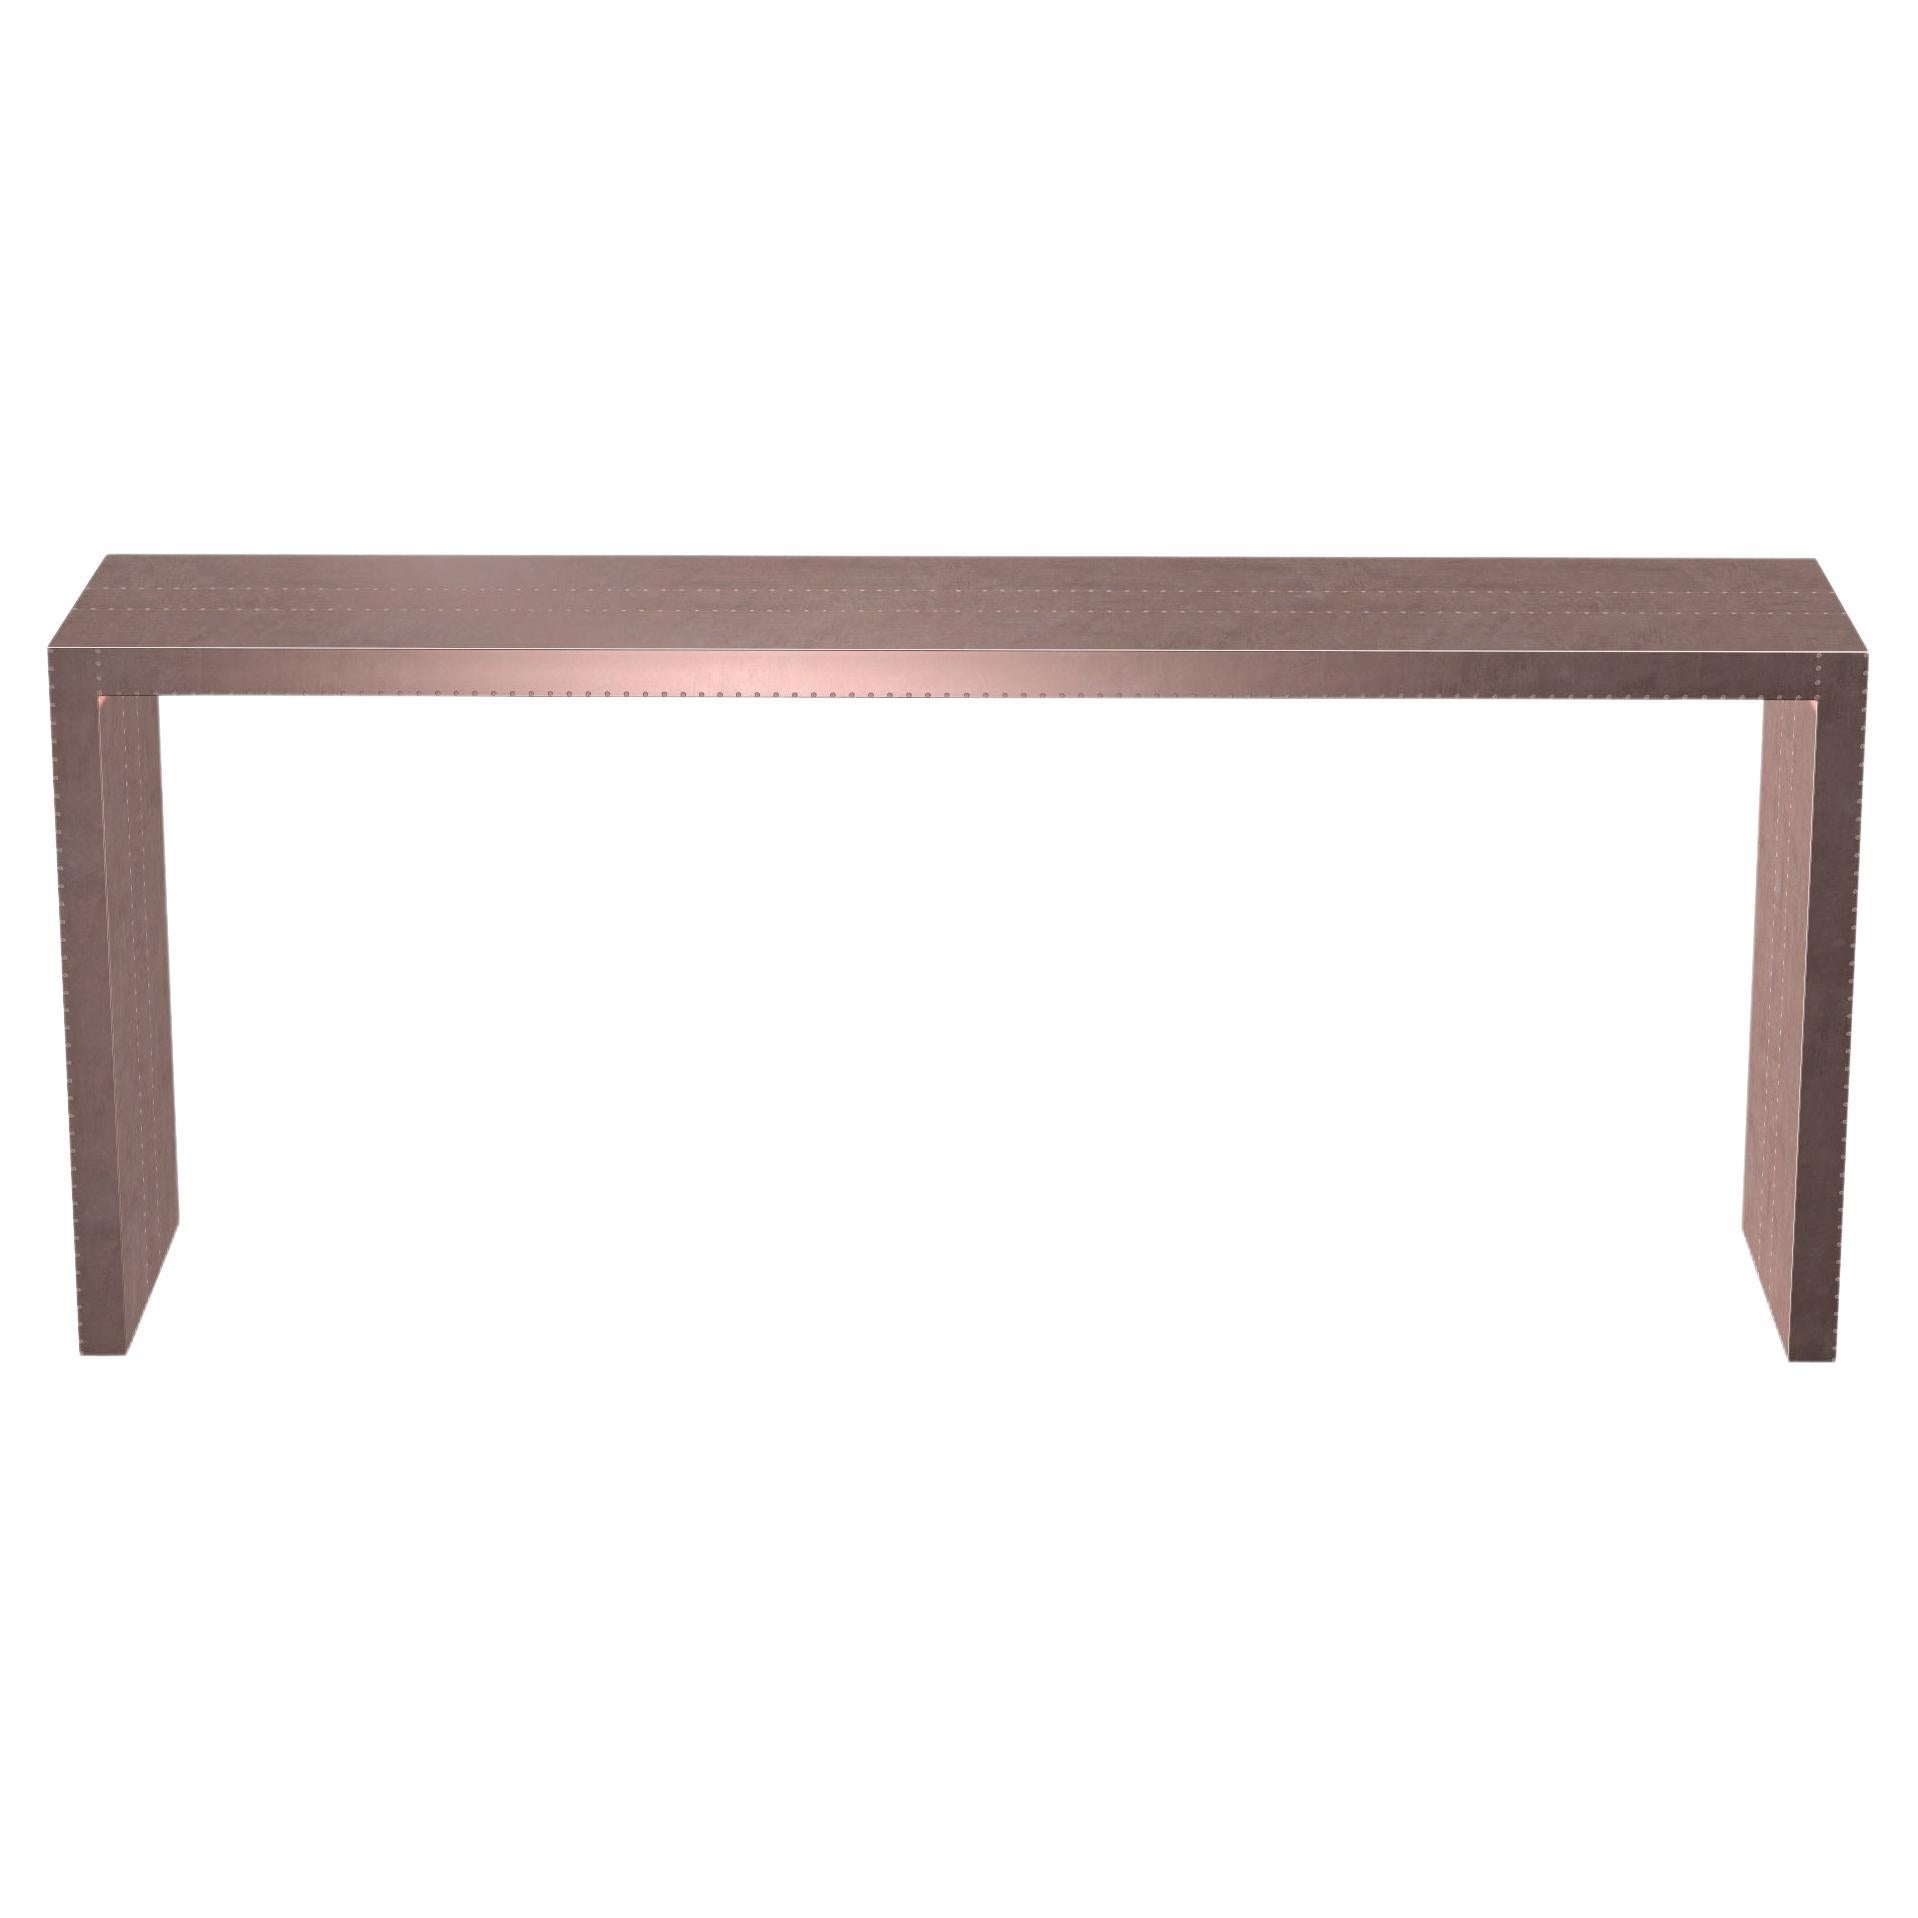 Art Deco Rectangular Console Tables Fine Hammered Copper by Alison Spear For Sale